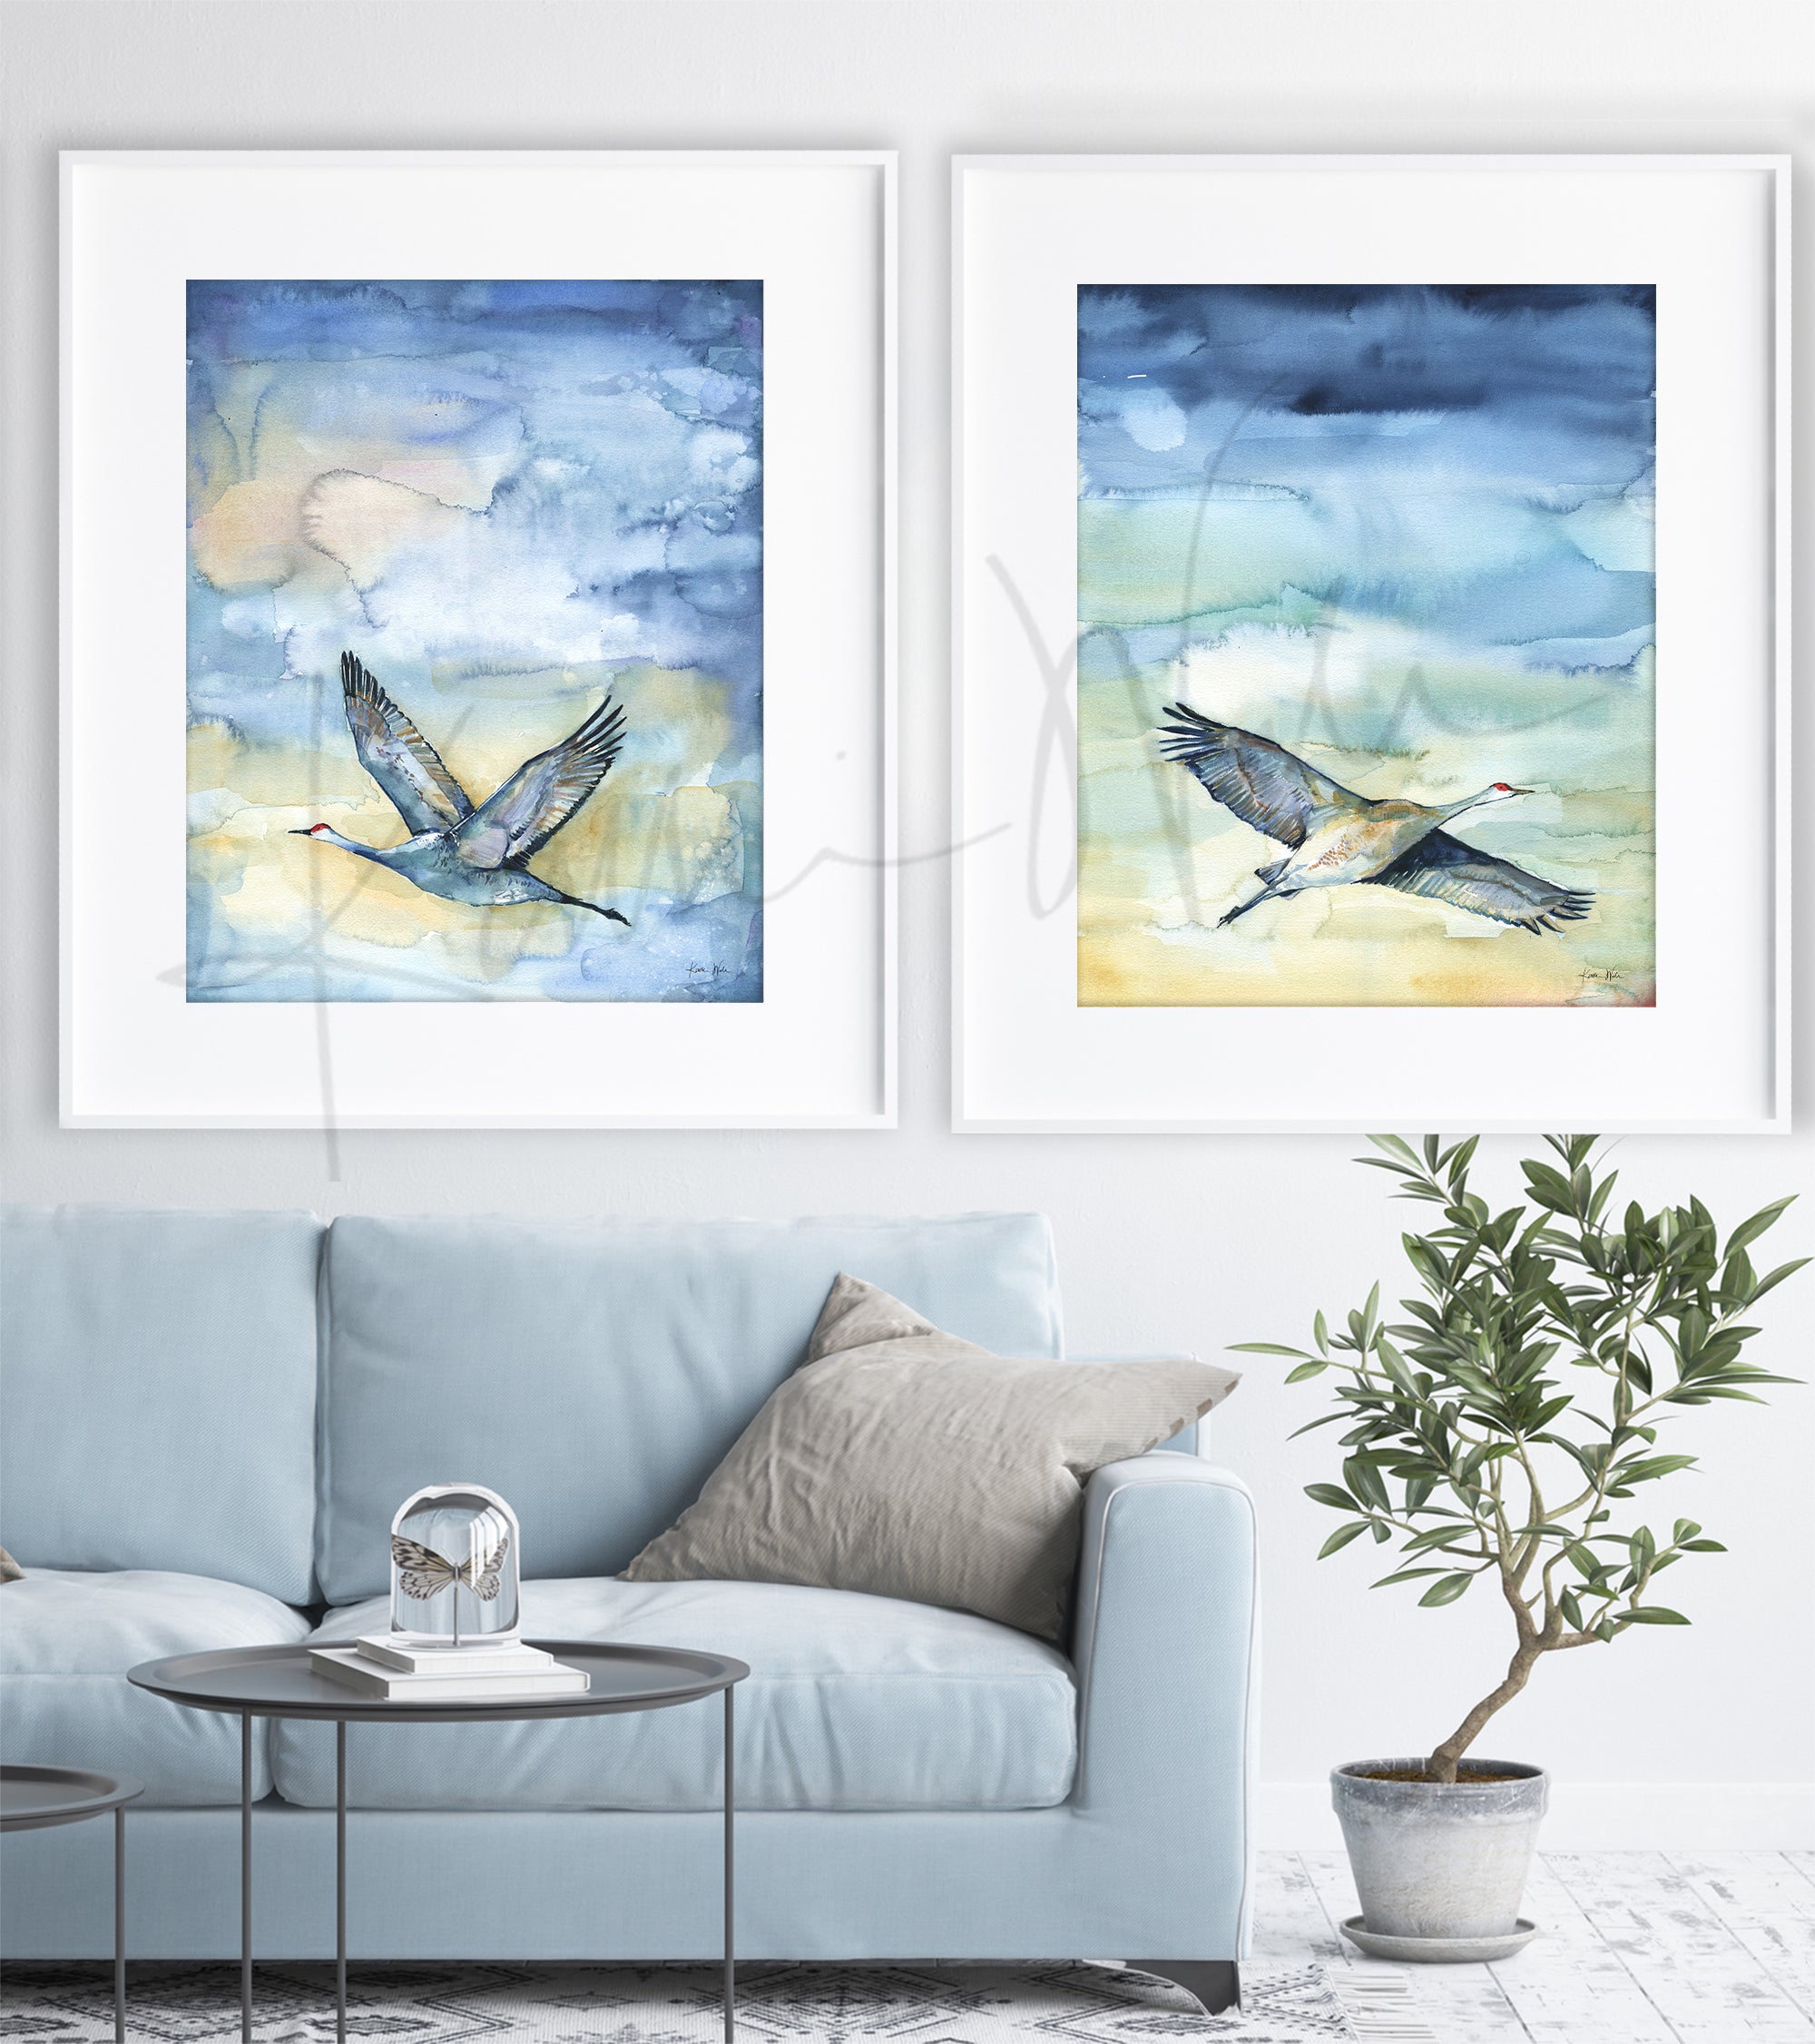 Framed watercolor painting set of flying cranes. The paintings are hanging over a blue couch.